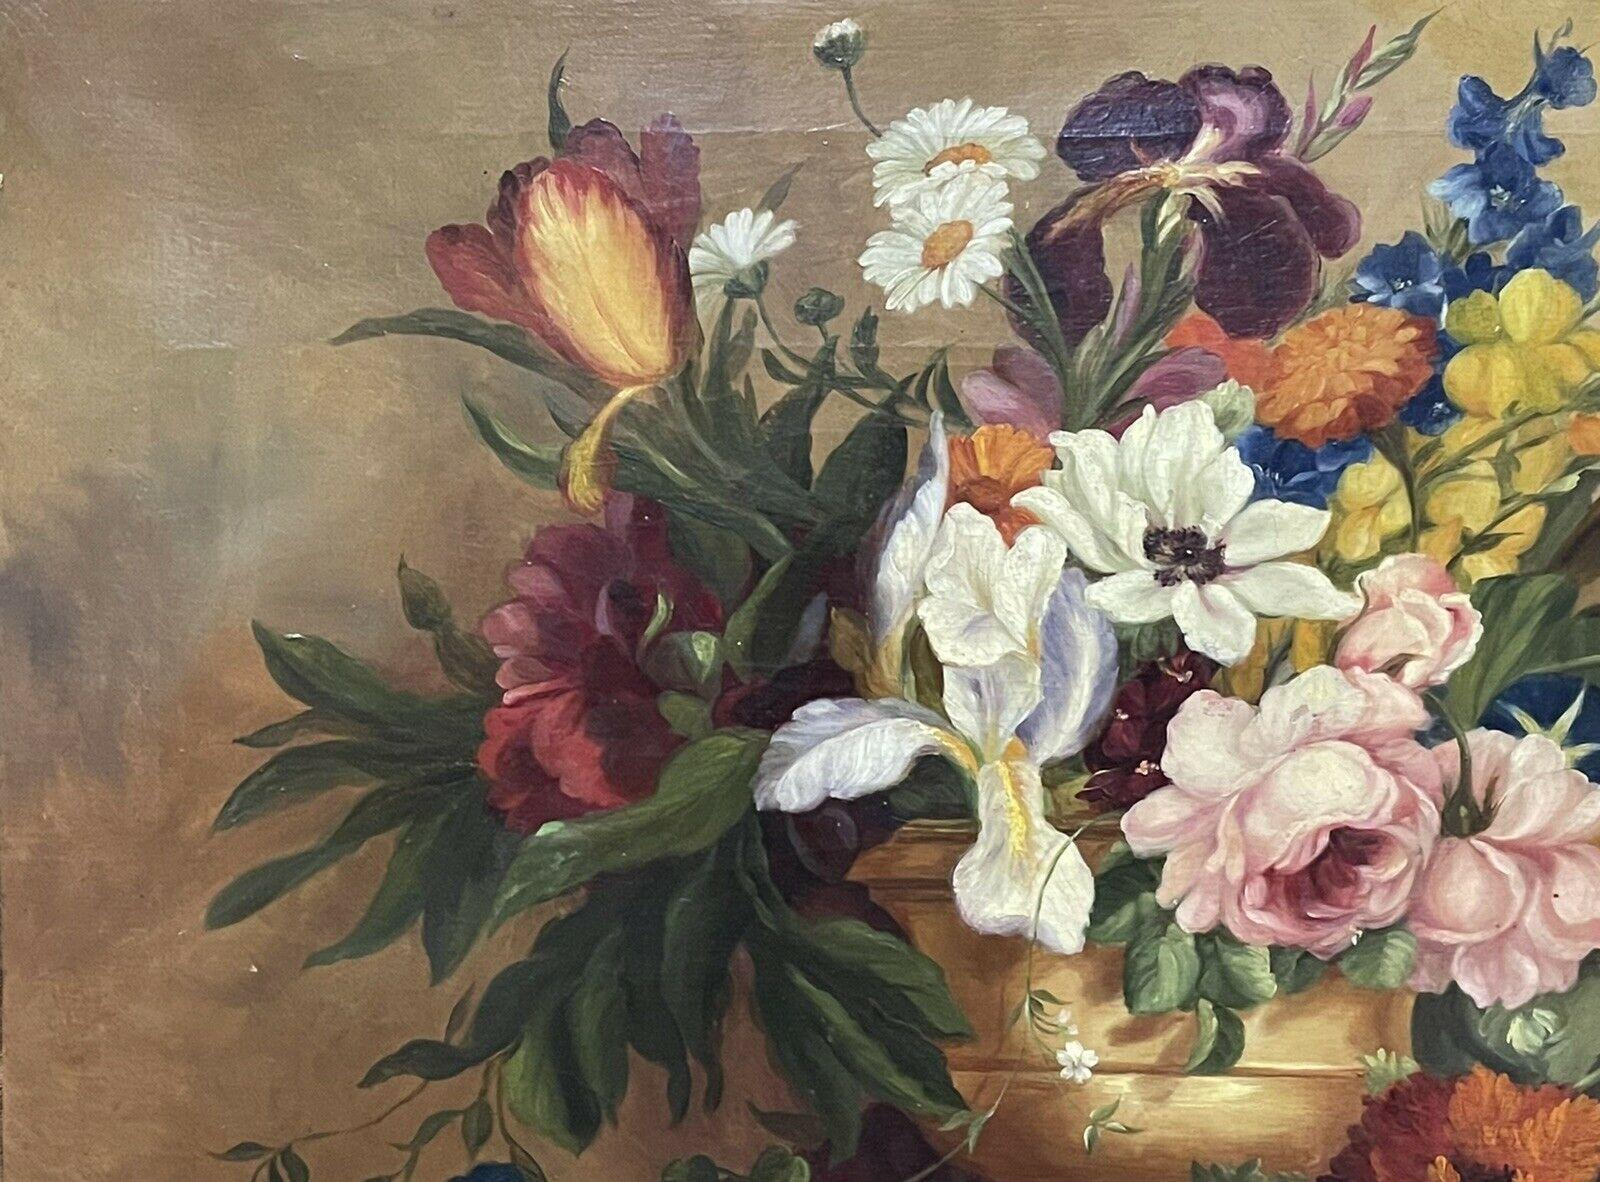 Artist/ School: English School, early 20th century.

Title: Classical Still Life of Flowers

Medium: oil painting on canvas, framed

Size: painting: 17 x 23 inches, frame: 20.5 x 26.75 inches

Provenance: from a private collection in